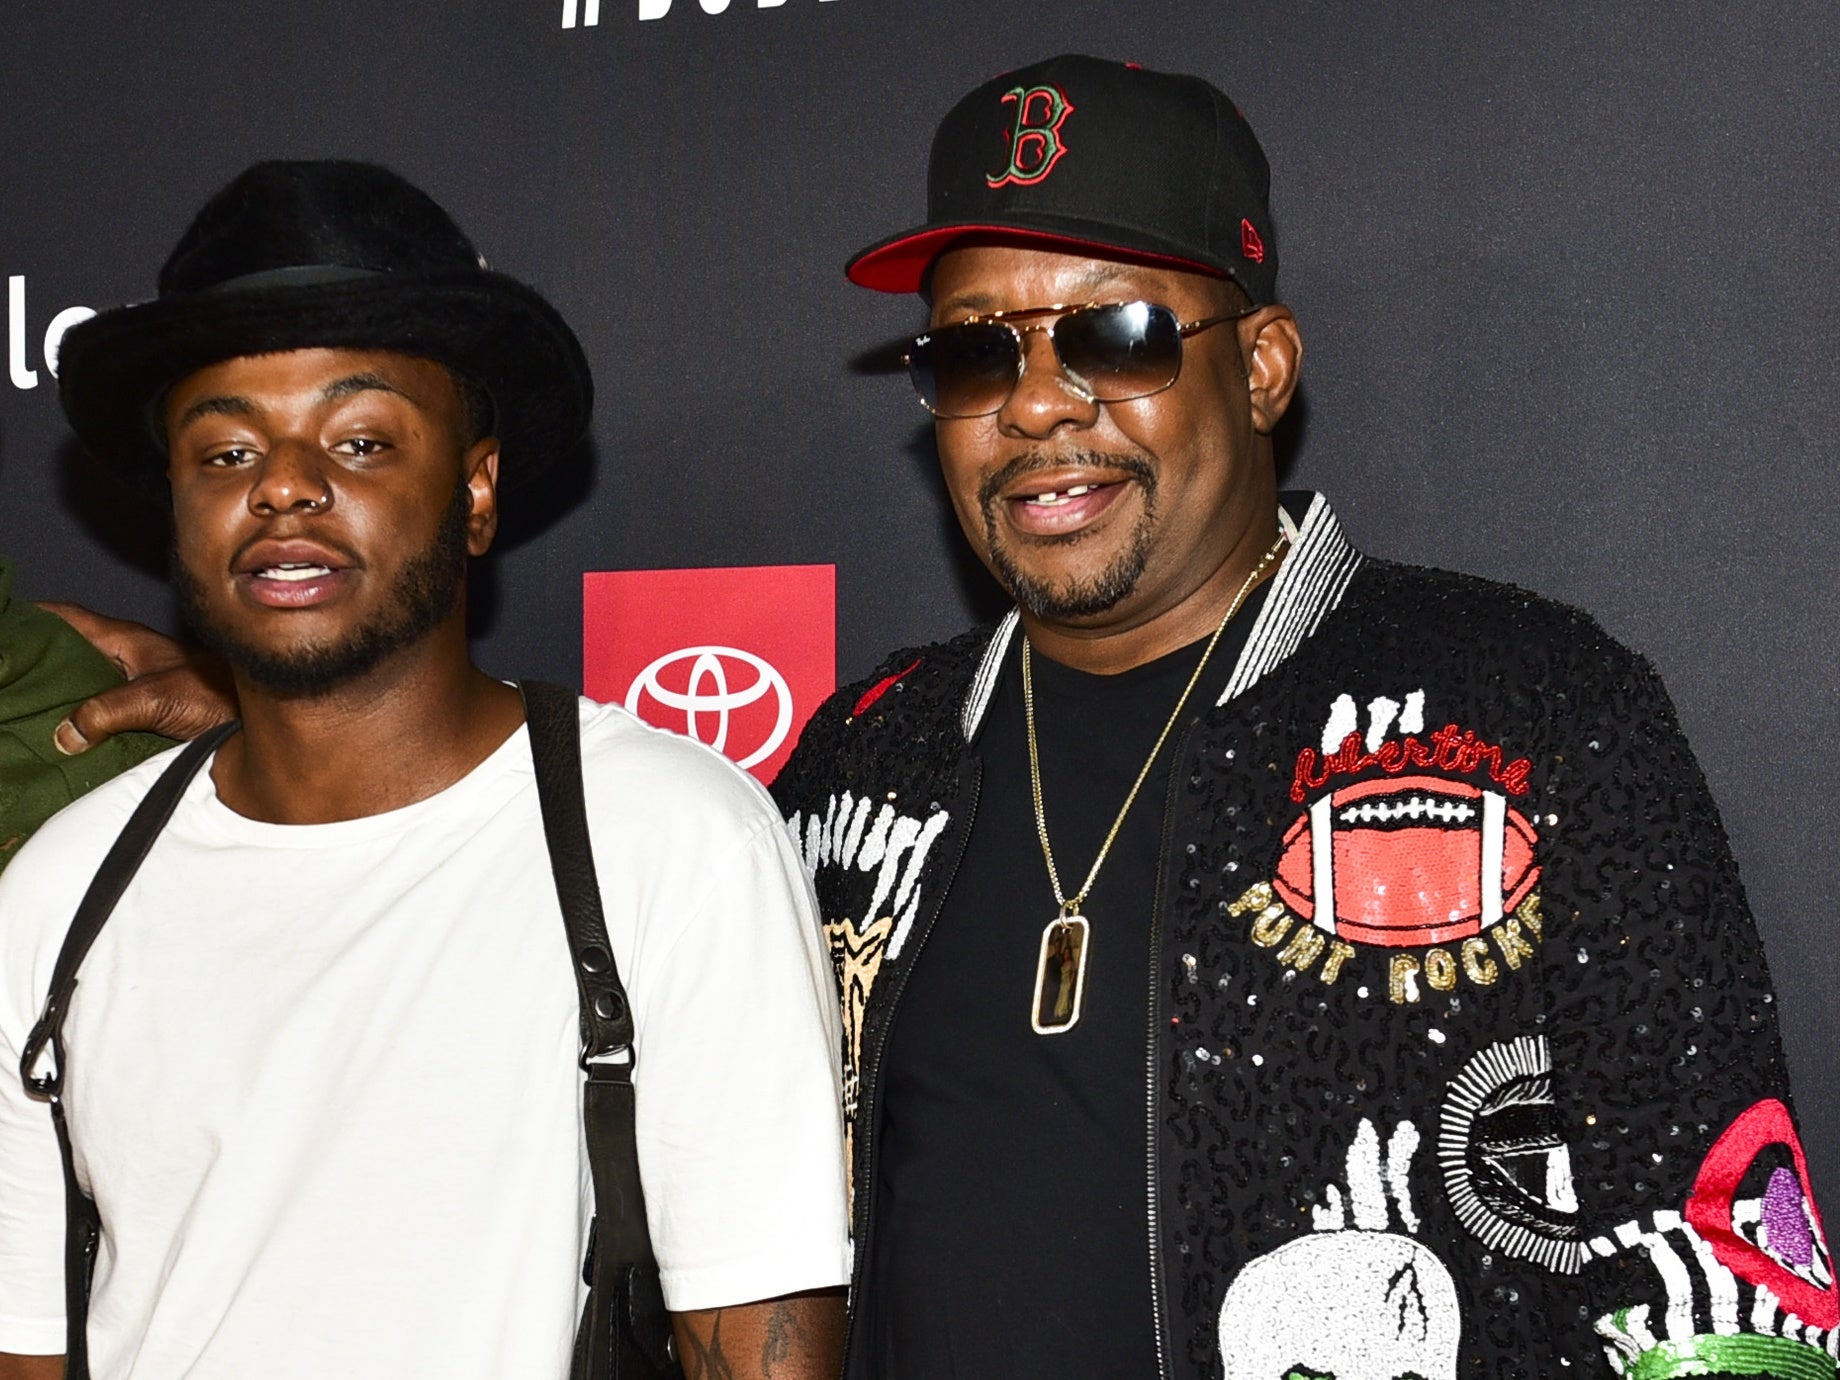 Bobby Brown's Son, Bobby Brown Jr., Has Passed Away